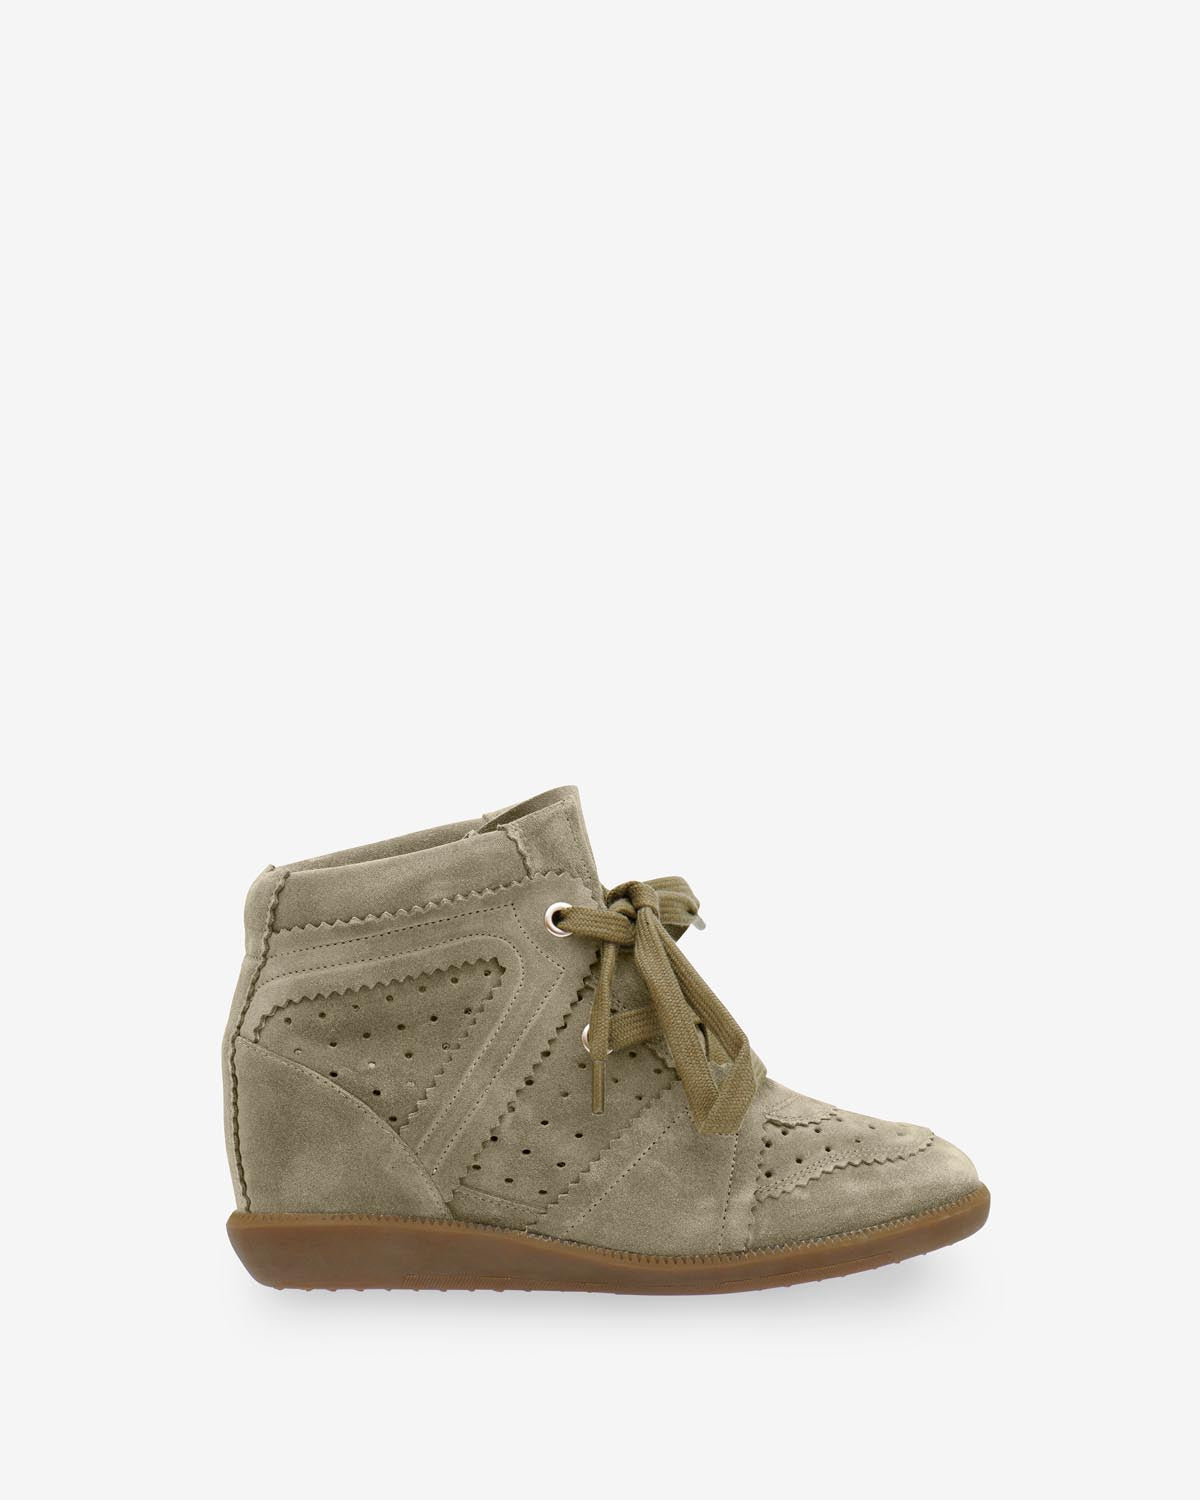 Sneaker bobby Woman Taupe 5